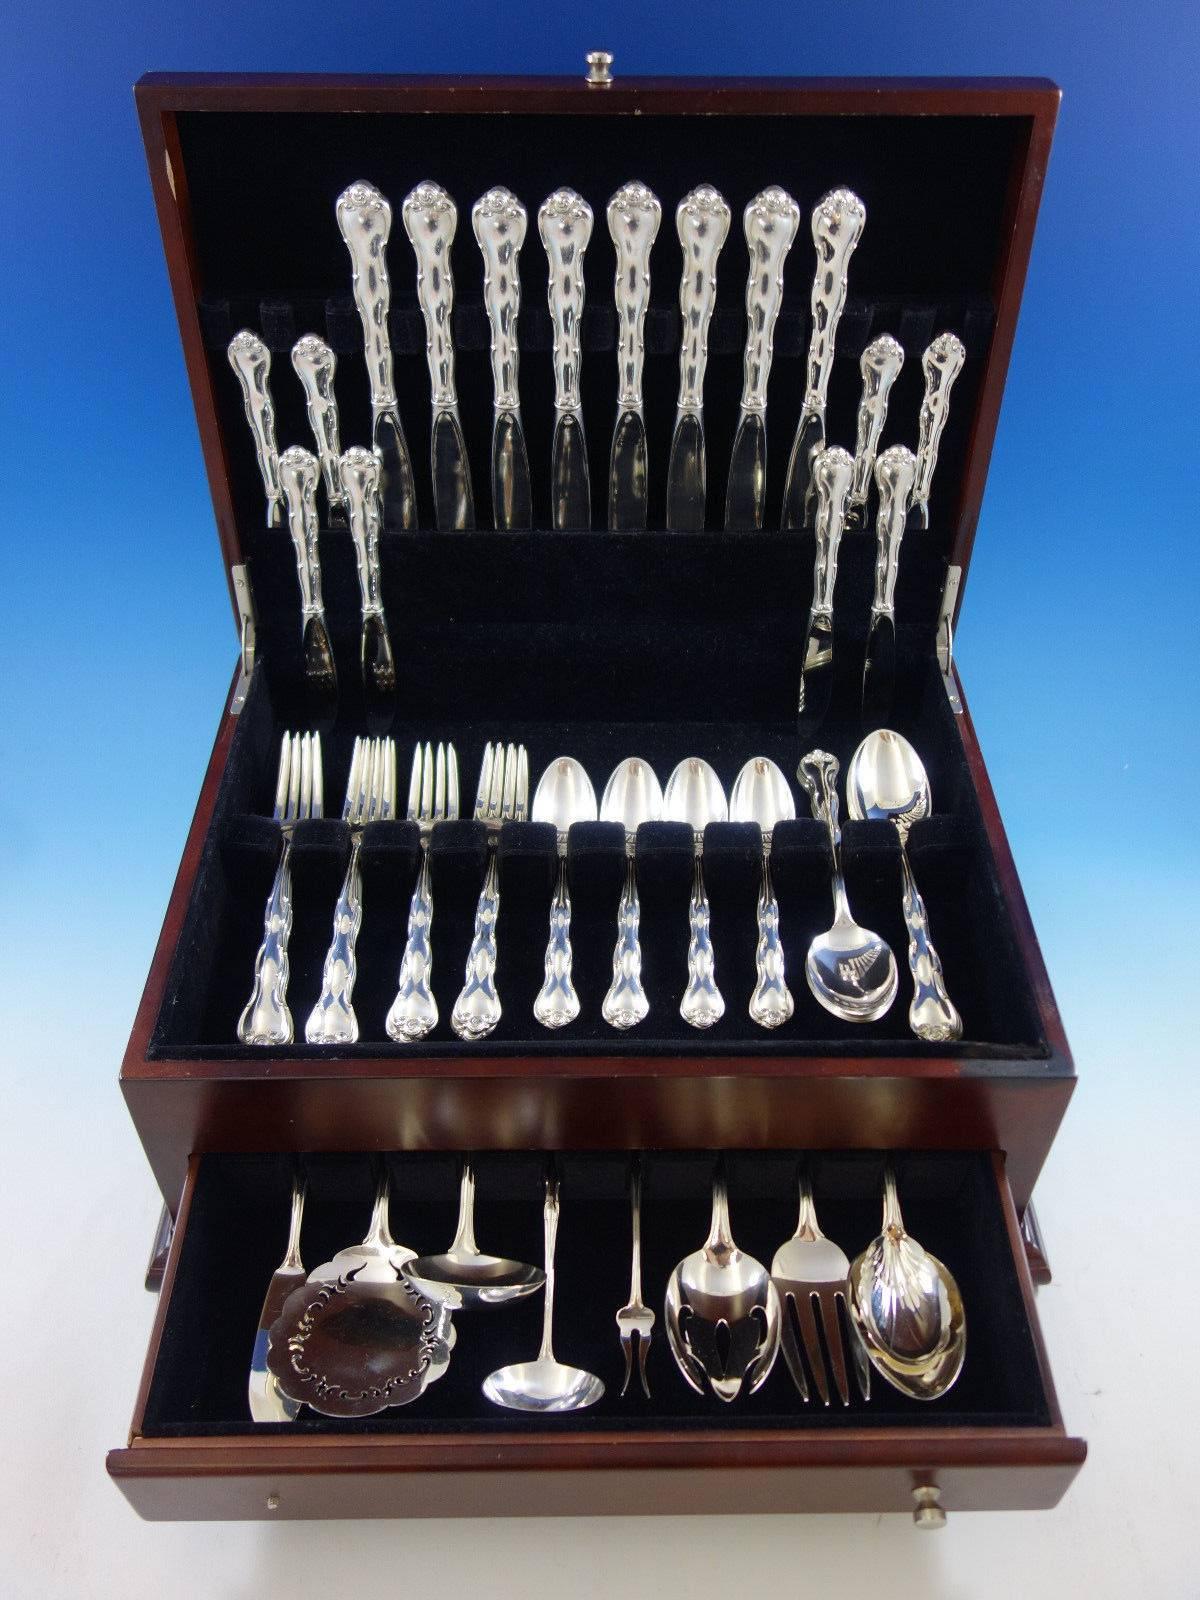 Rondo by Gorham sterling silver flatware set - 57 pieces. This set includes: 

Eight knives, 8 7/8